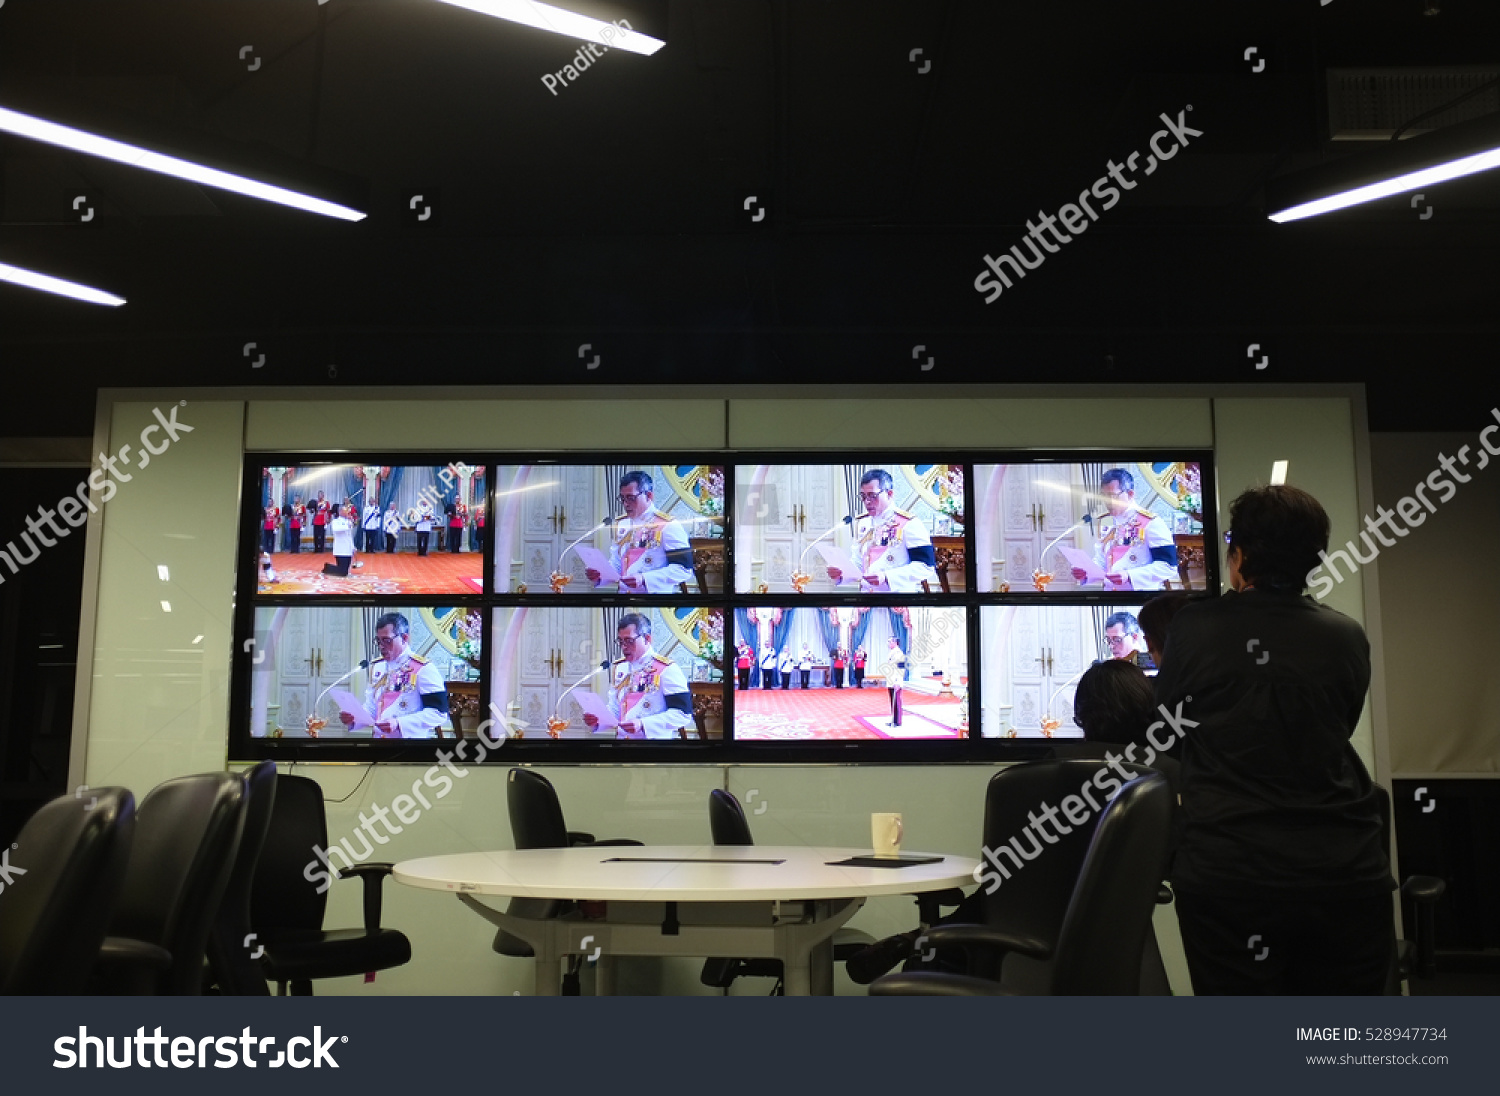 BANGKOK, THAILAND, Dec 1, 2016 - Reporters in The Nation editorial watching HM King Maha Vajiralongkorn ascended the throne as King Rama X on live TV on Thursday night. #528947734